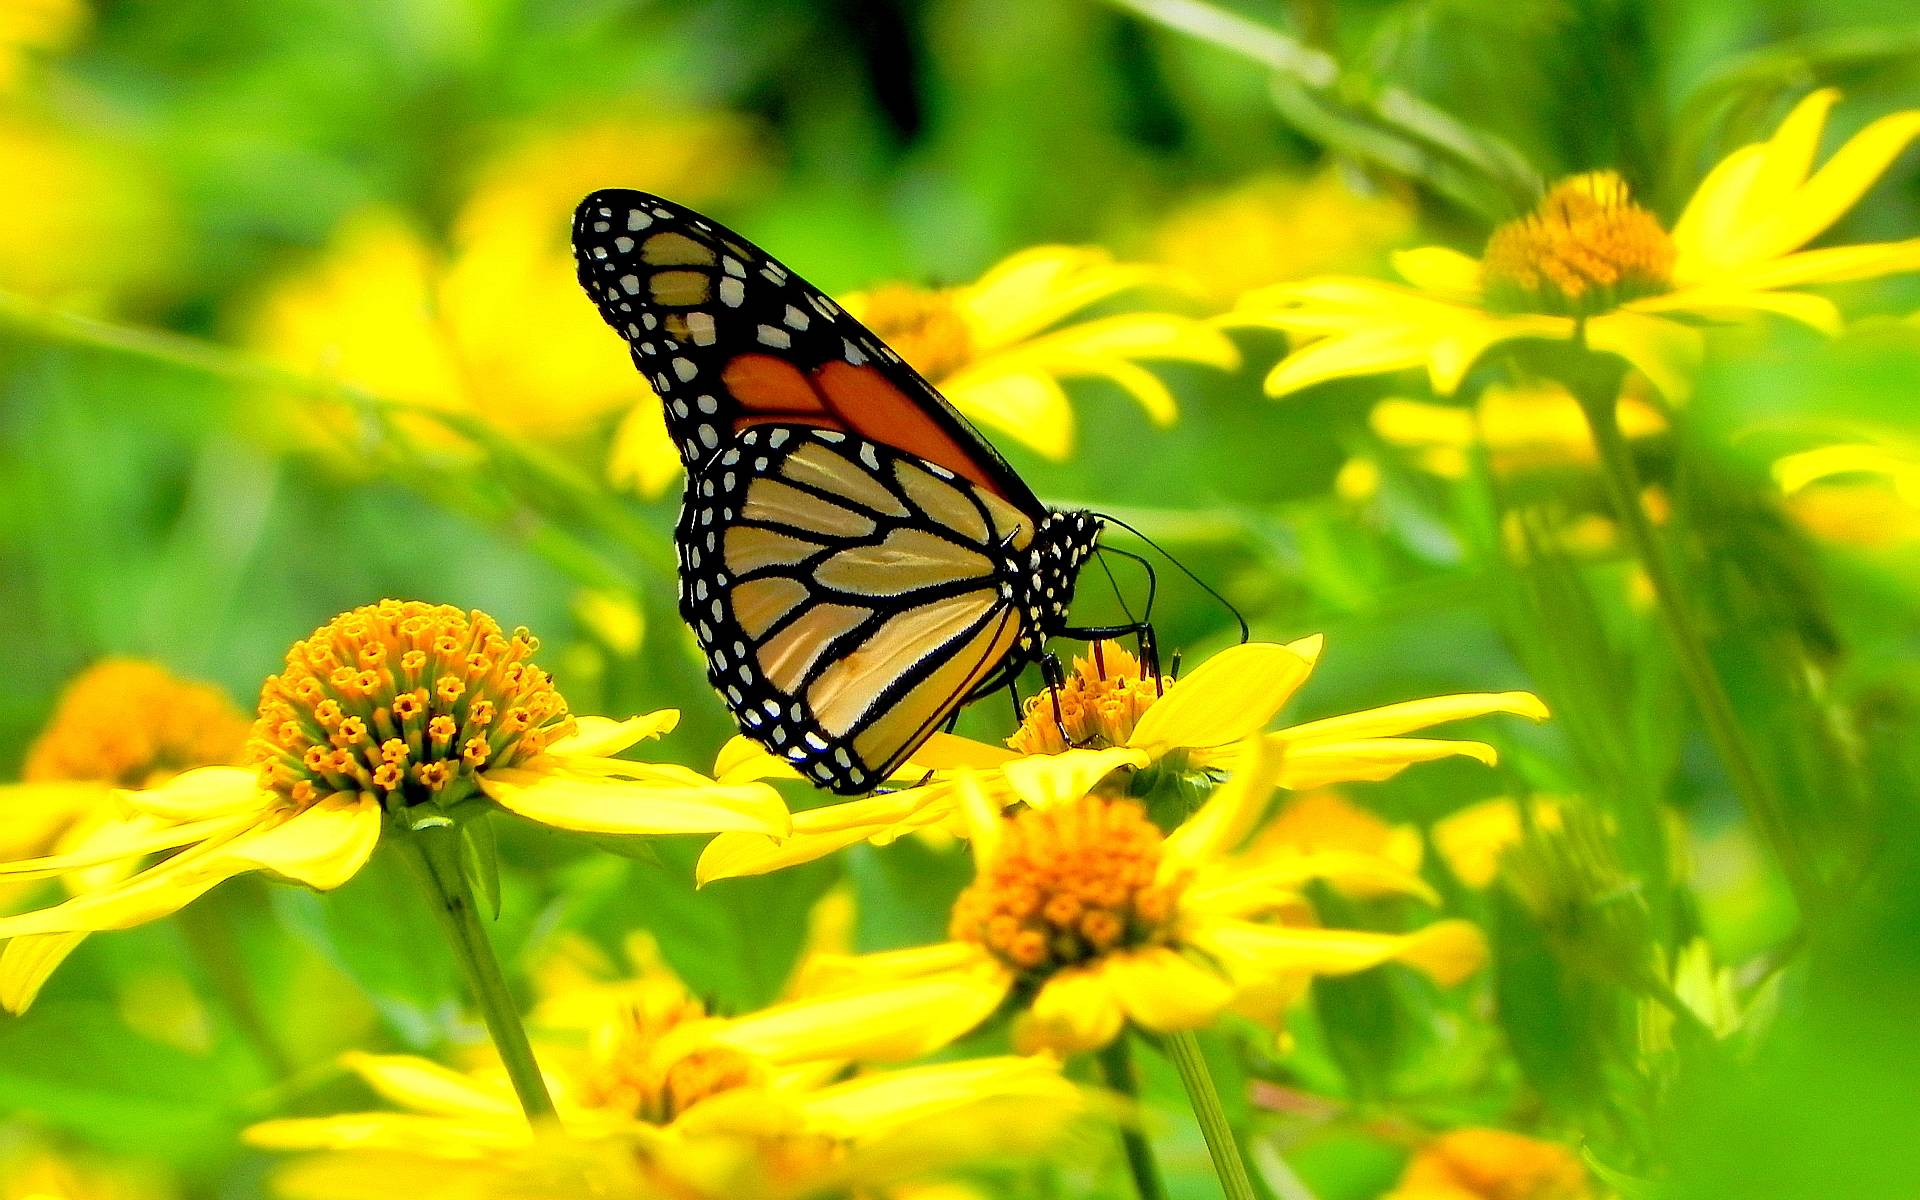 Bio Eco Design: Monarch butterfly flowers Wallpaper Picture